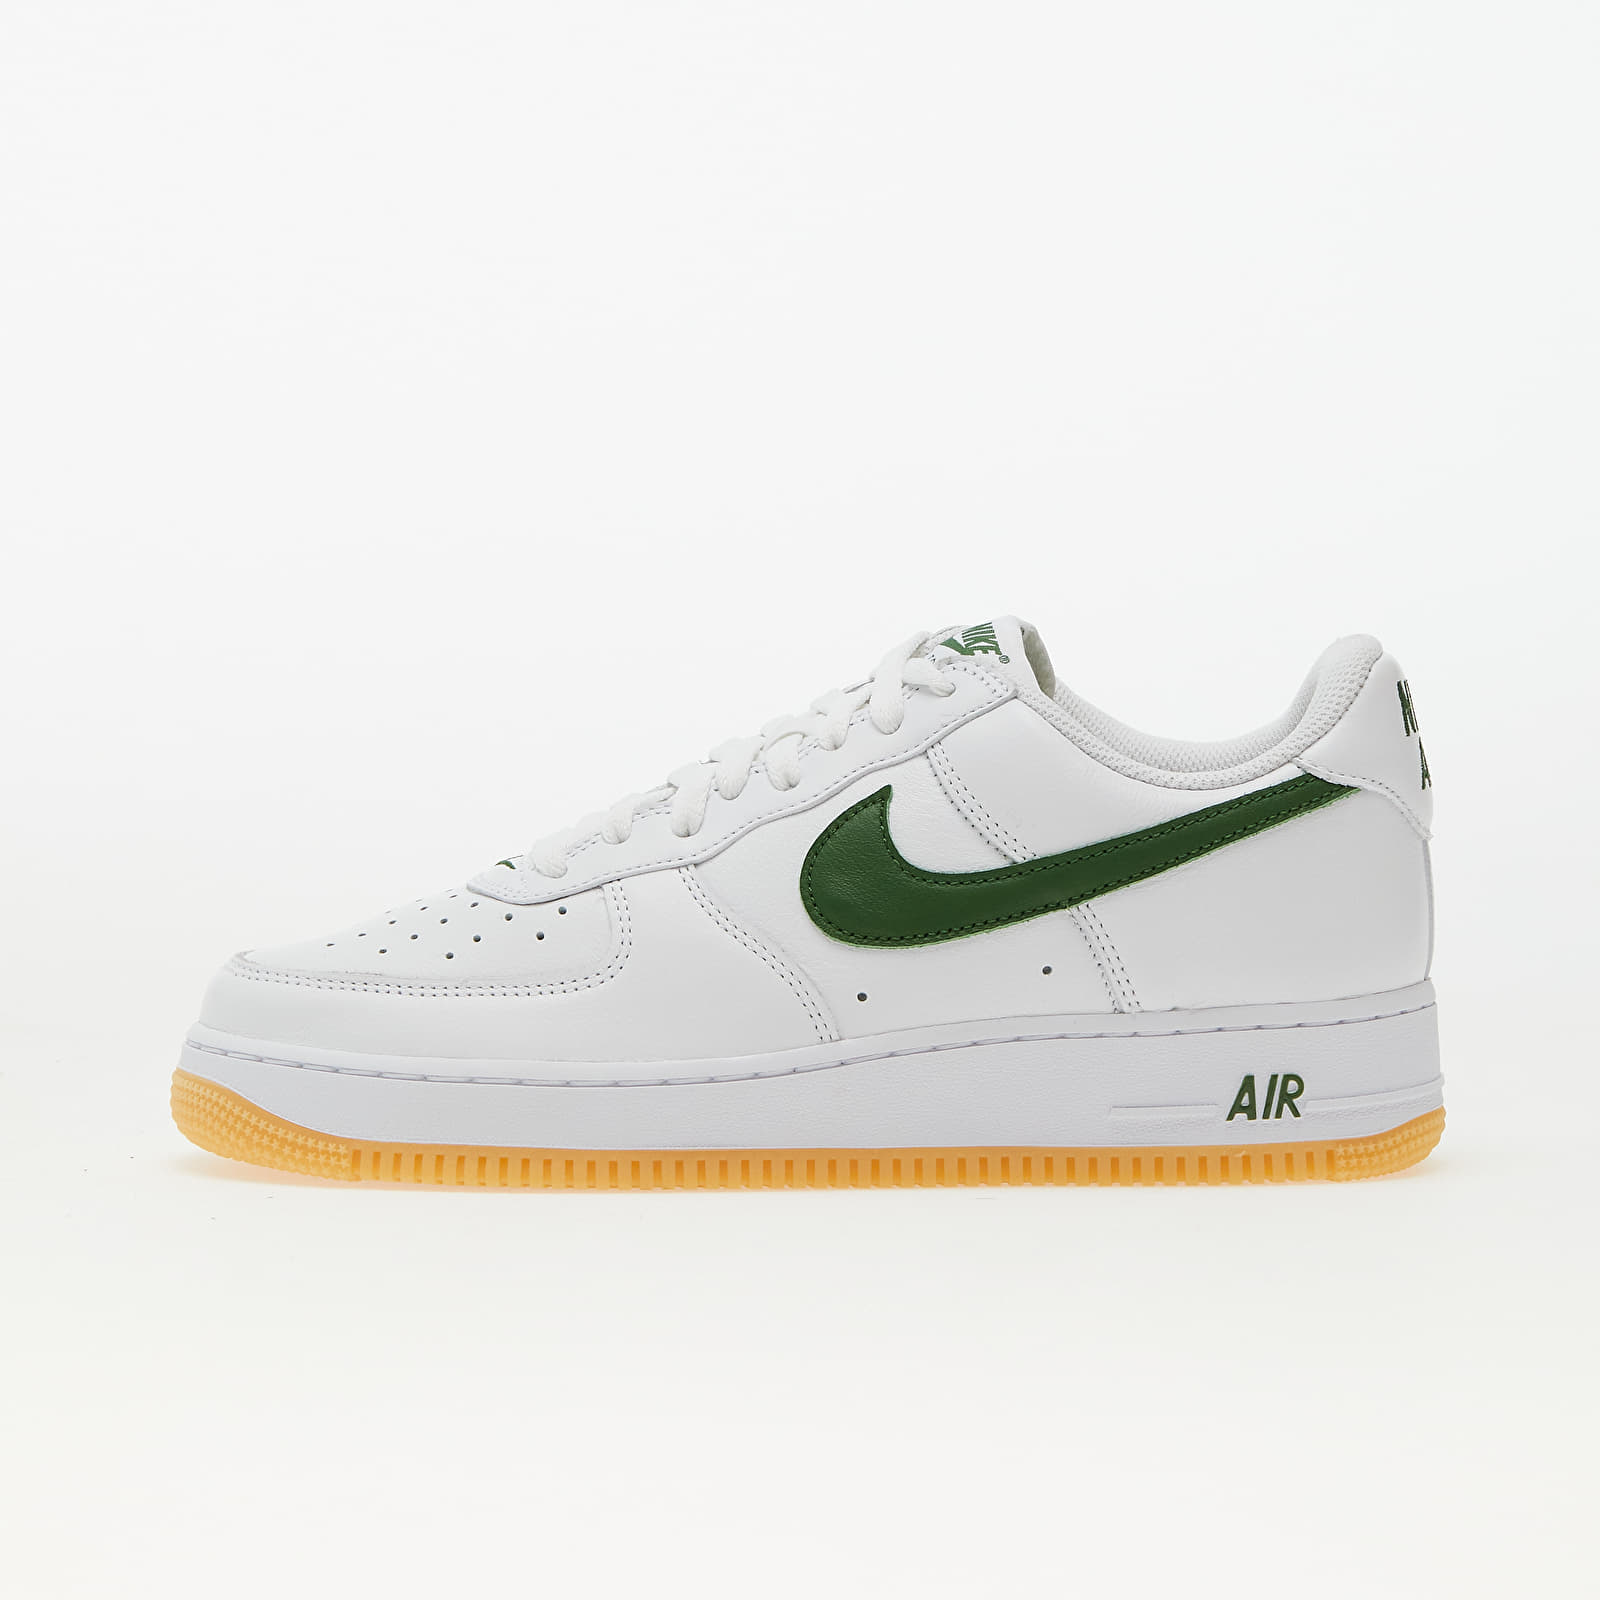 Levně Nike Air Force 1 Low Retro White/ Forest Green-Gum Yellow